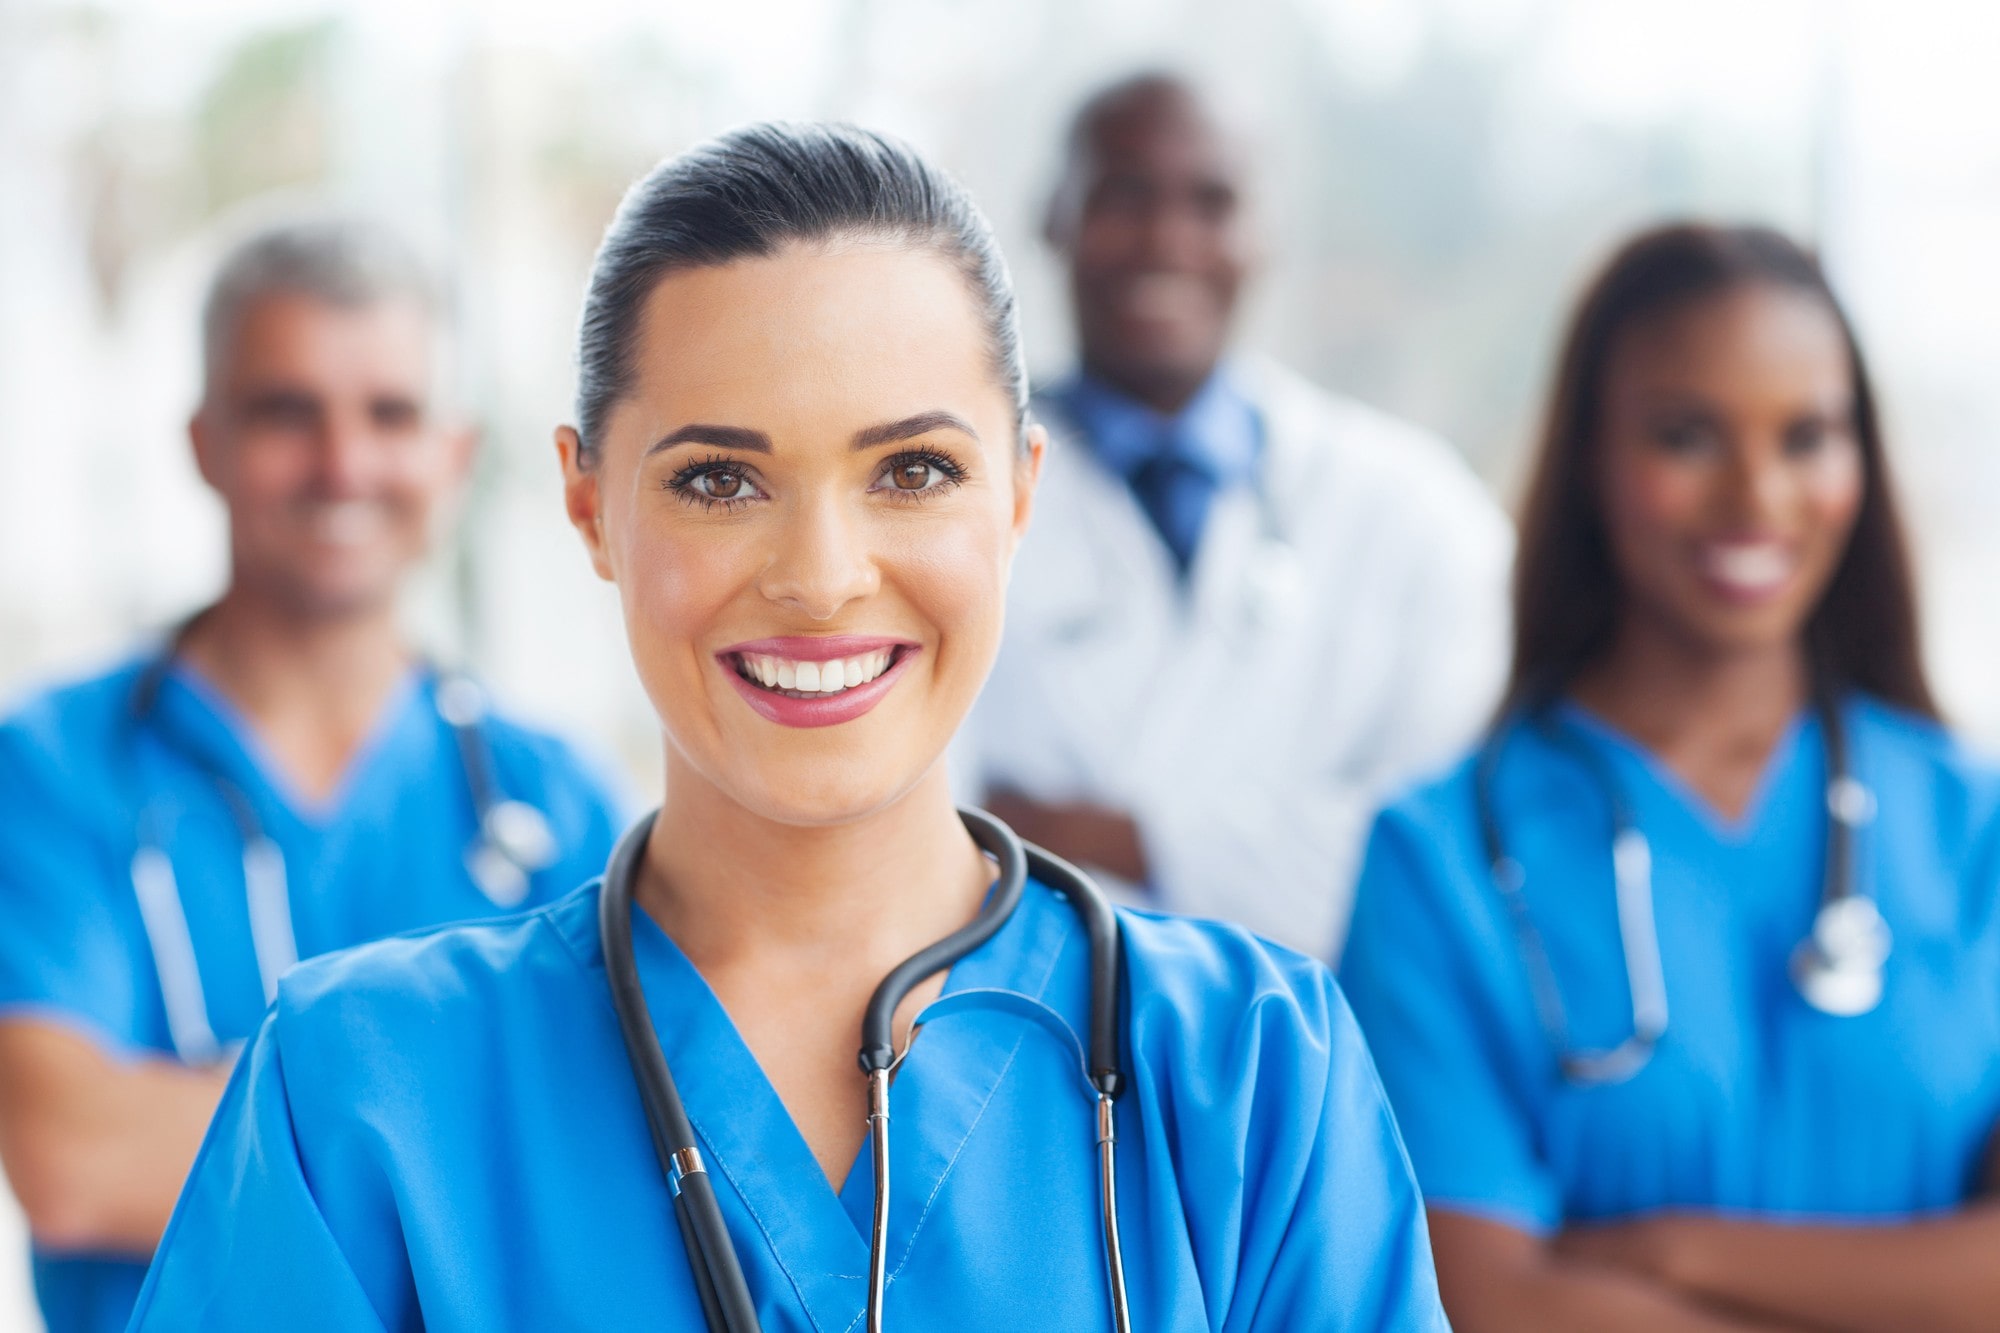 Group of Smiling Health Care Workers